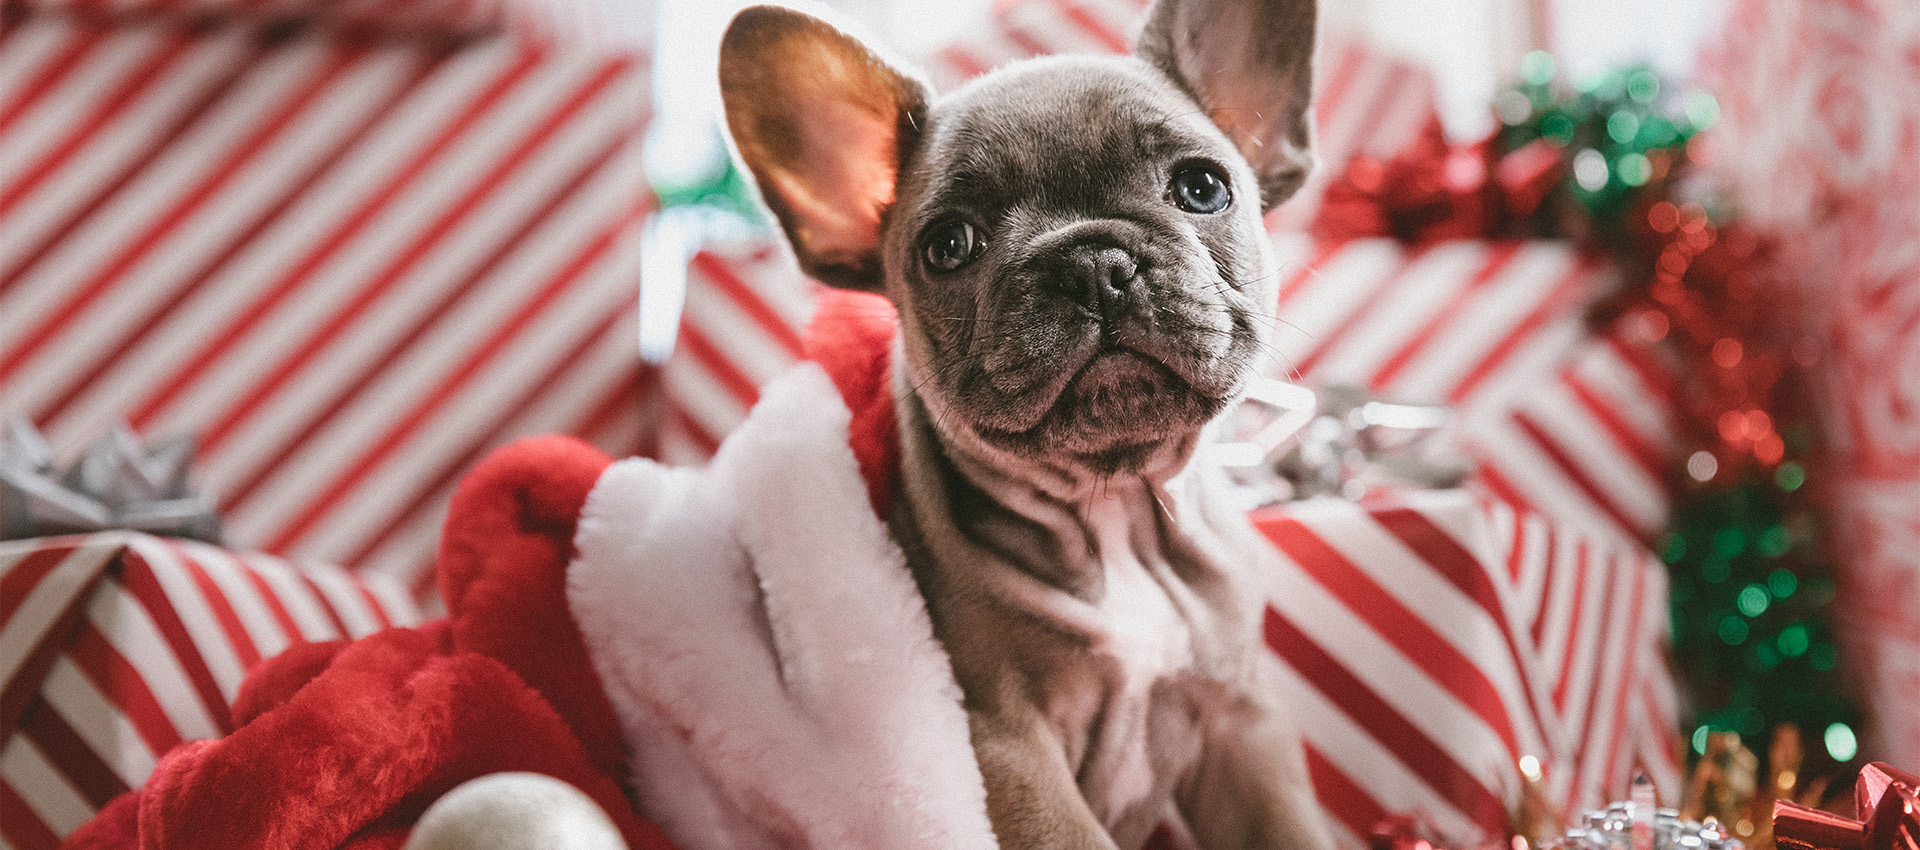 Image of a dog surrounded by presents